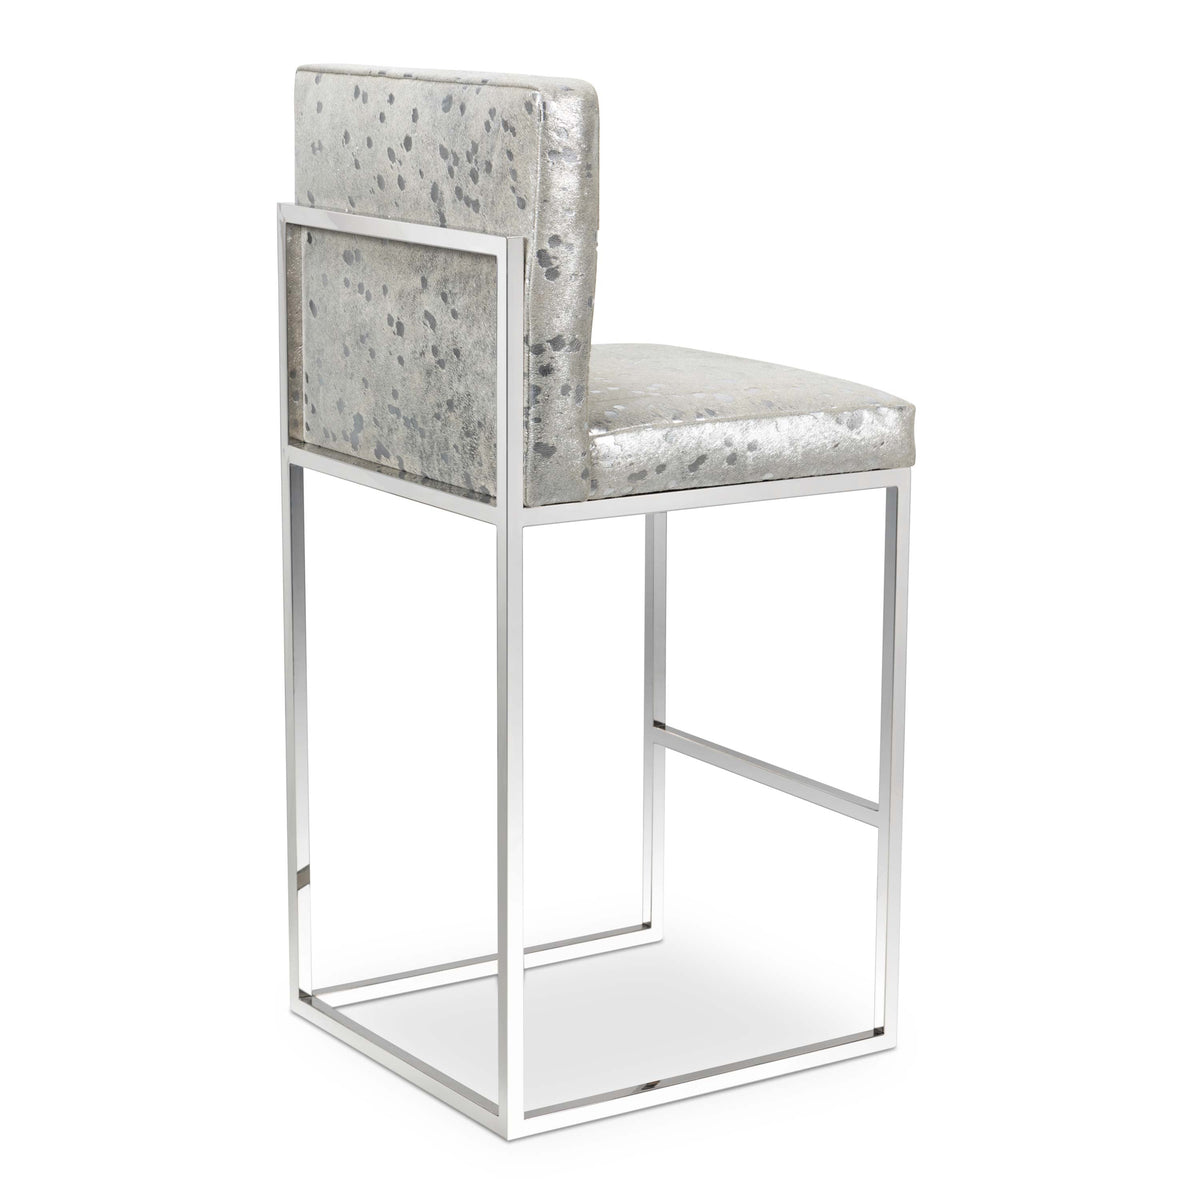 007 Bar Stool in Chrome Speckled Cowhide